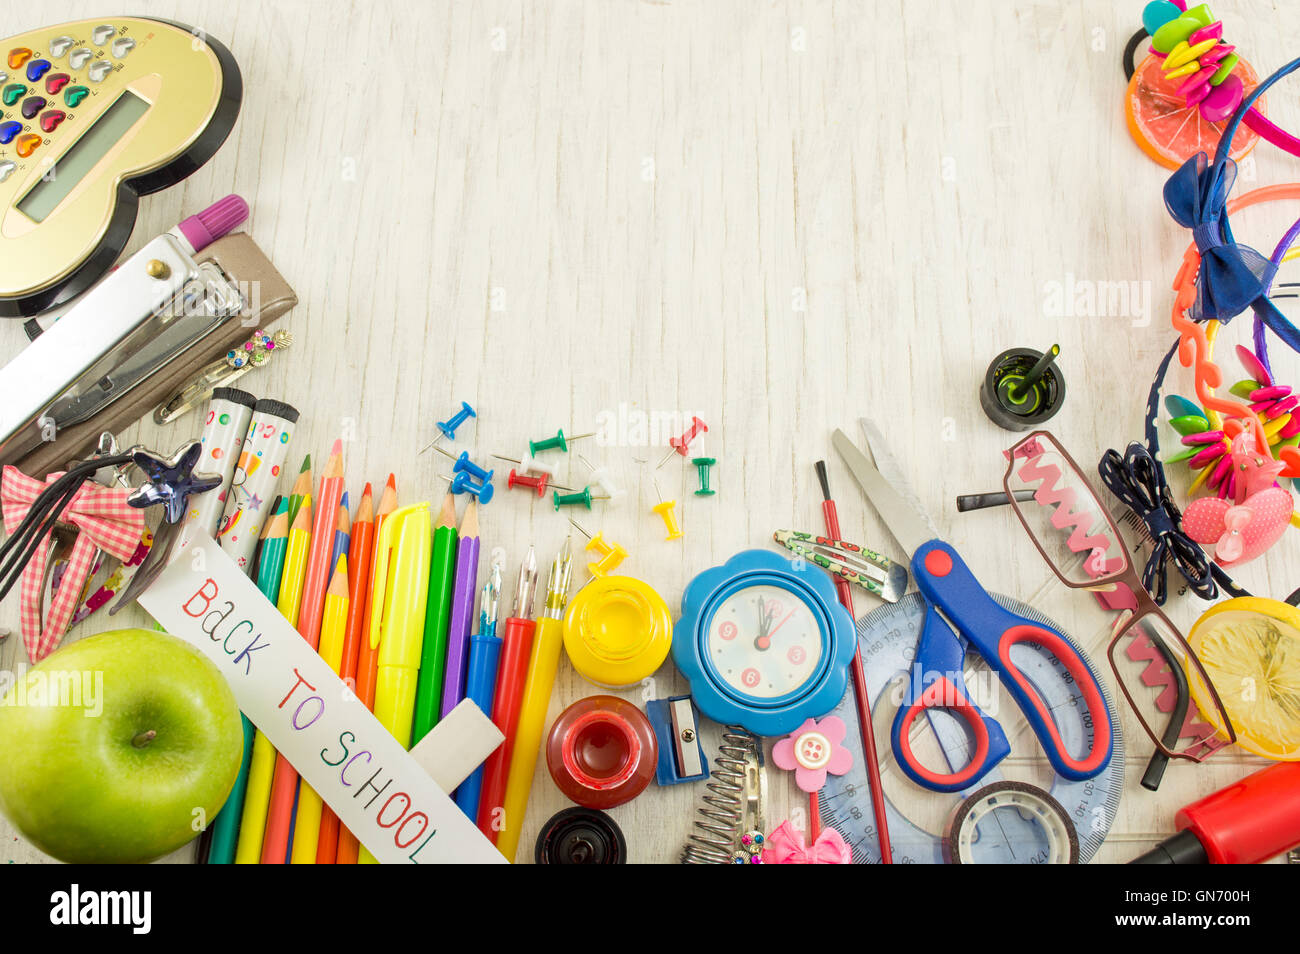 Creative chaos of learning tools for new school year Stock Photo